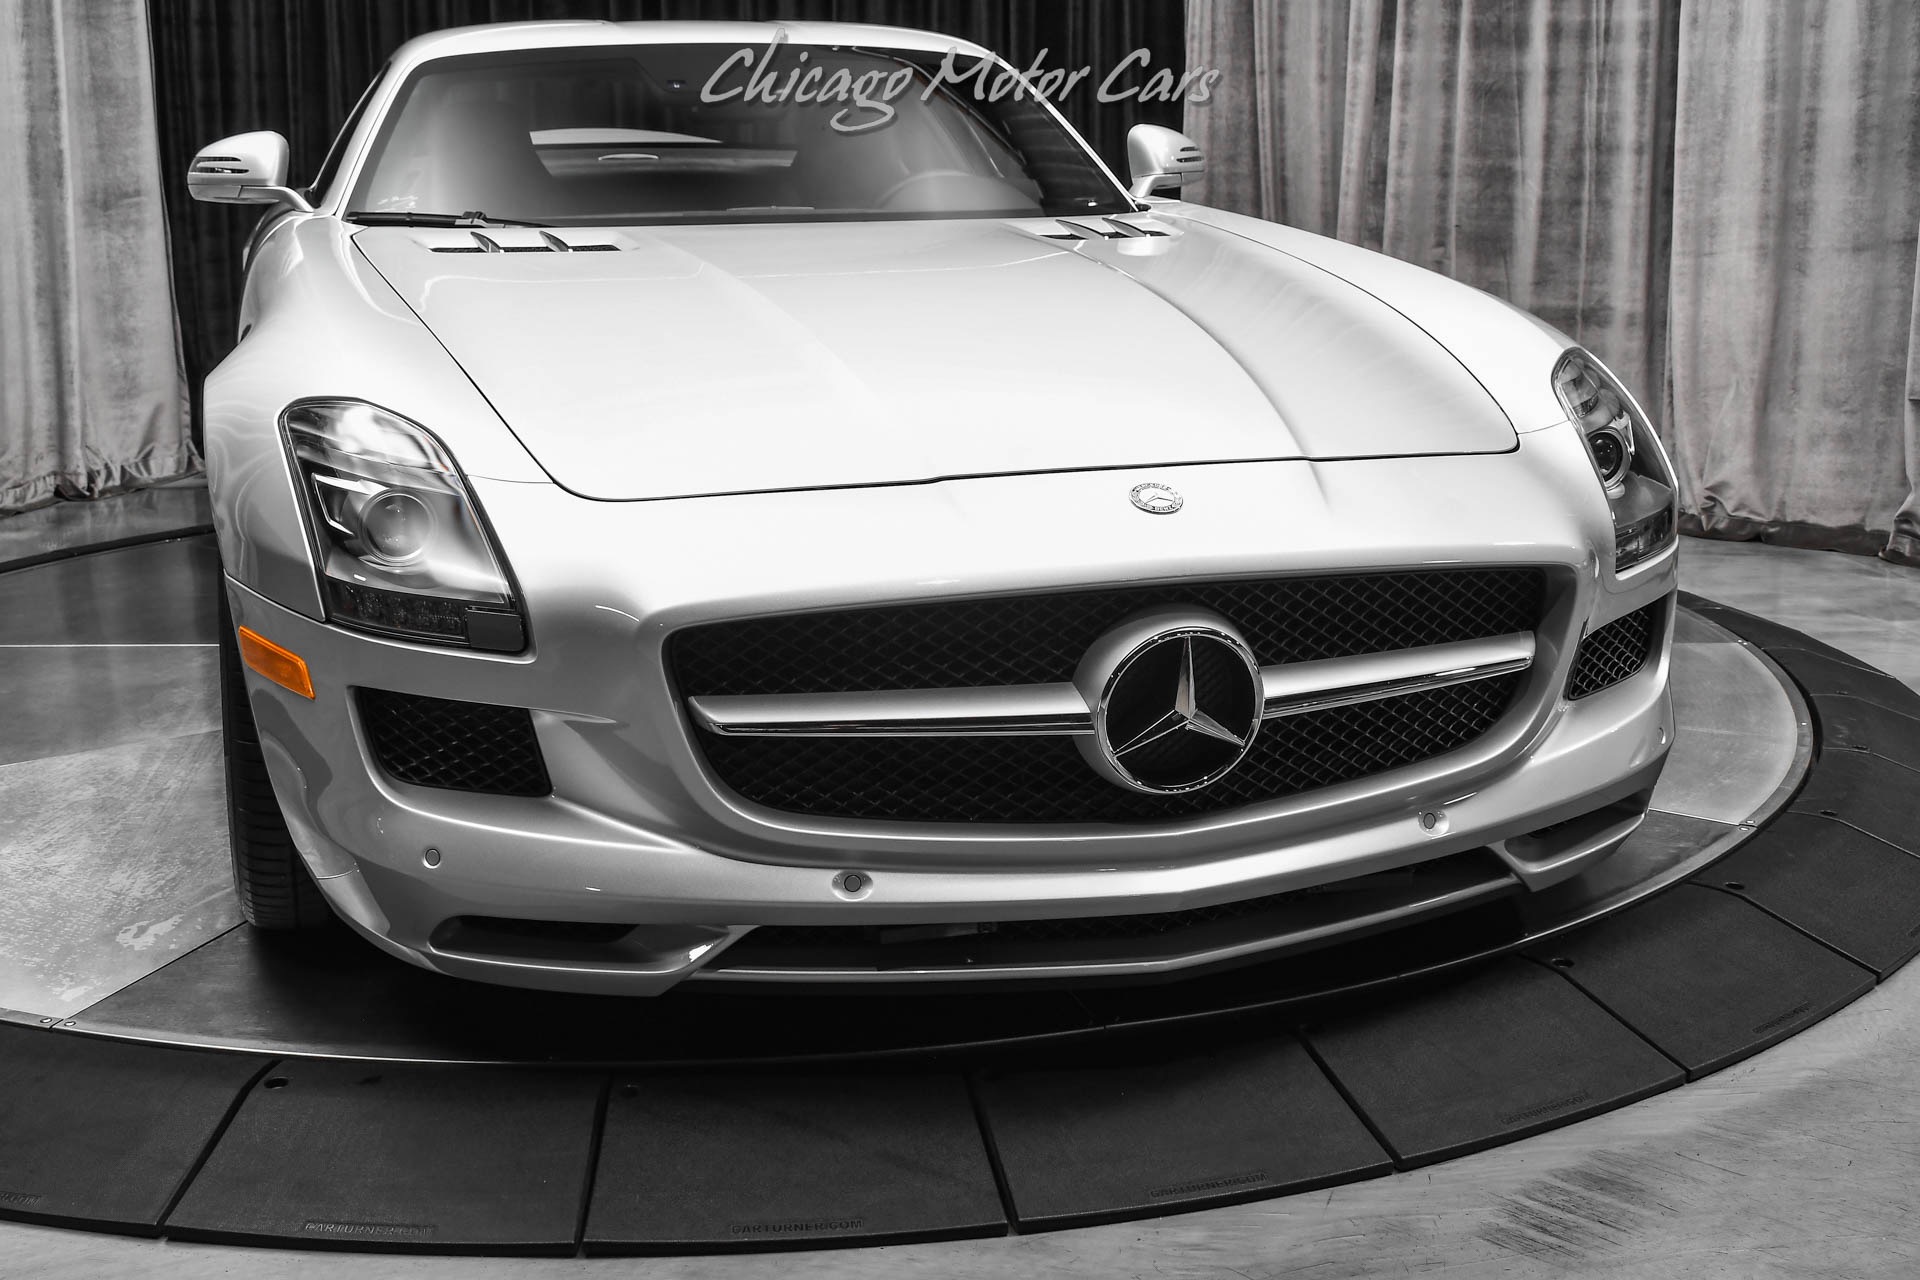 Used-2012-Mercedes-Benz-SLS-AMG-RARE-Gullwing-Coupe-HOT-Color-Combo-Carbon-Fiber-Trim-B-O-ONLY-7k-Miles